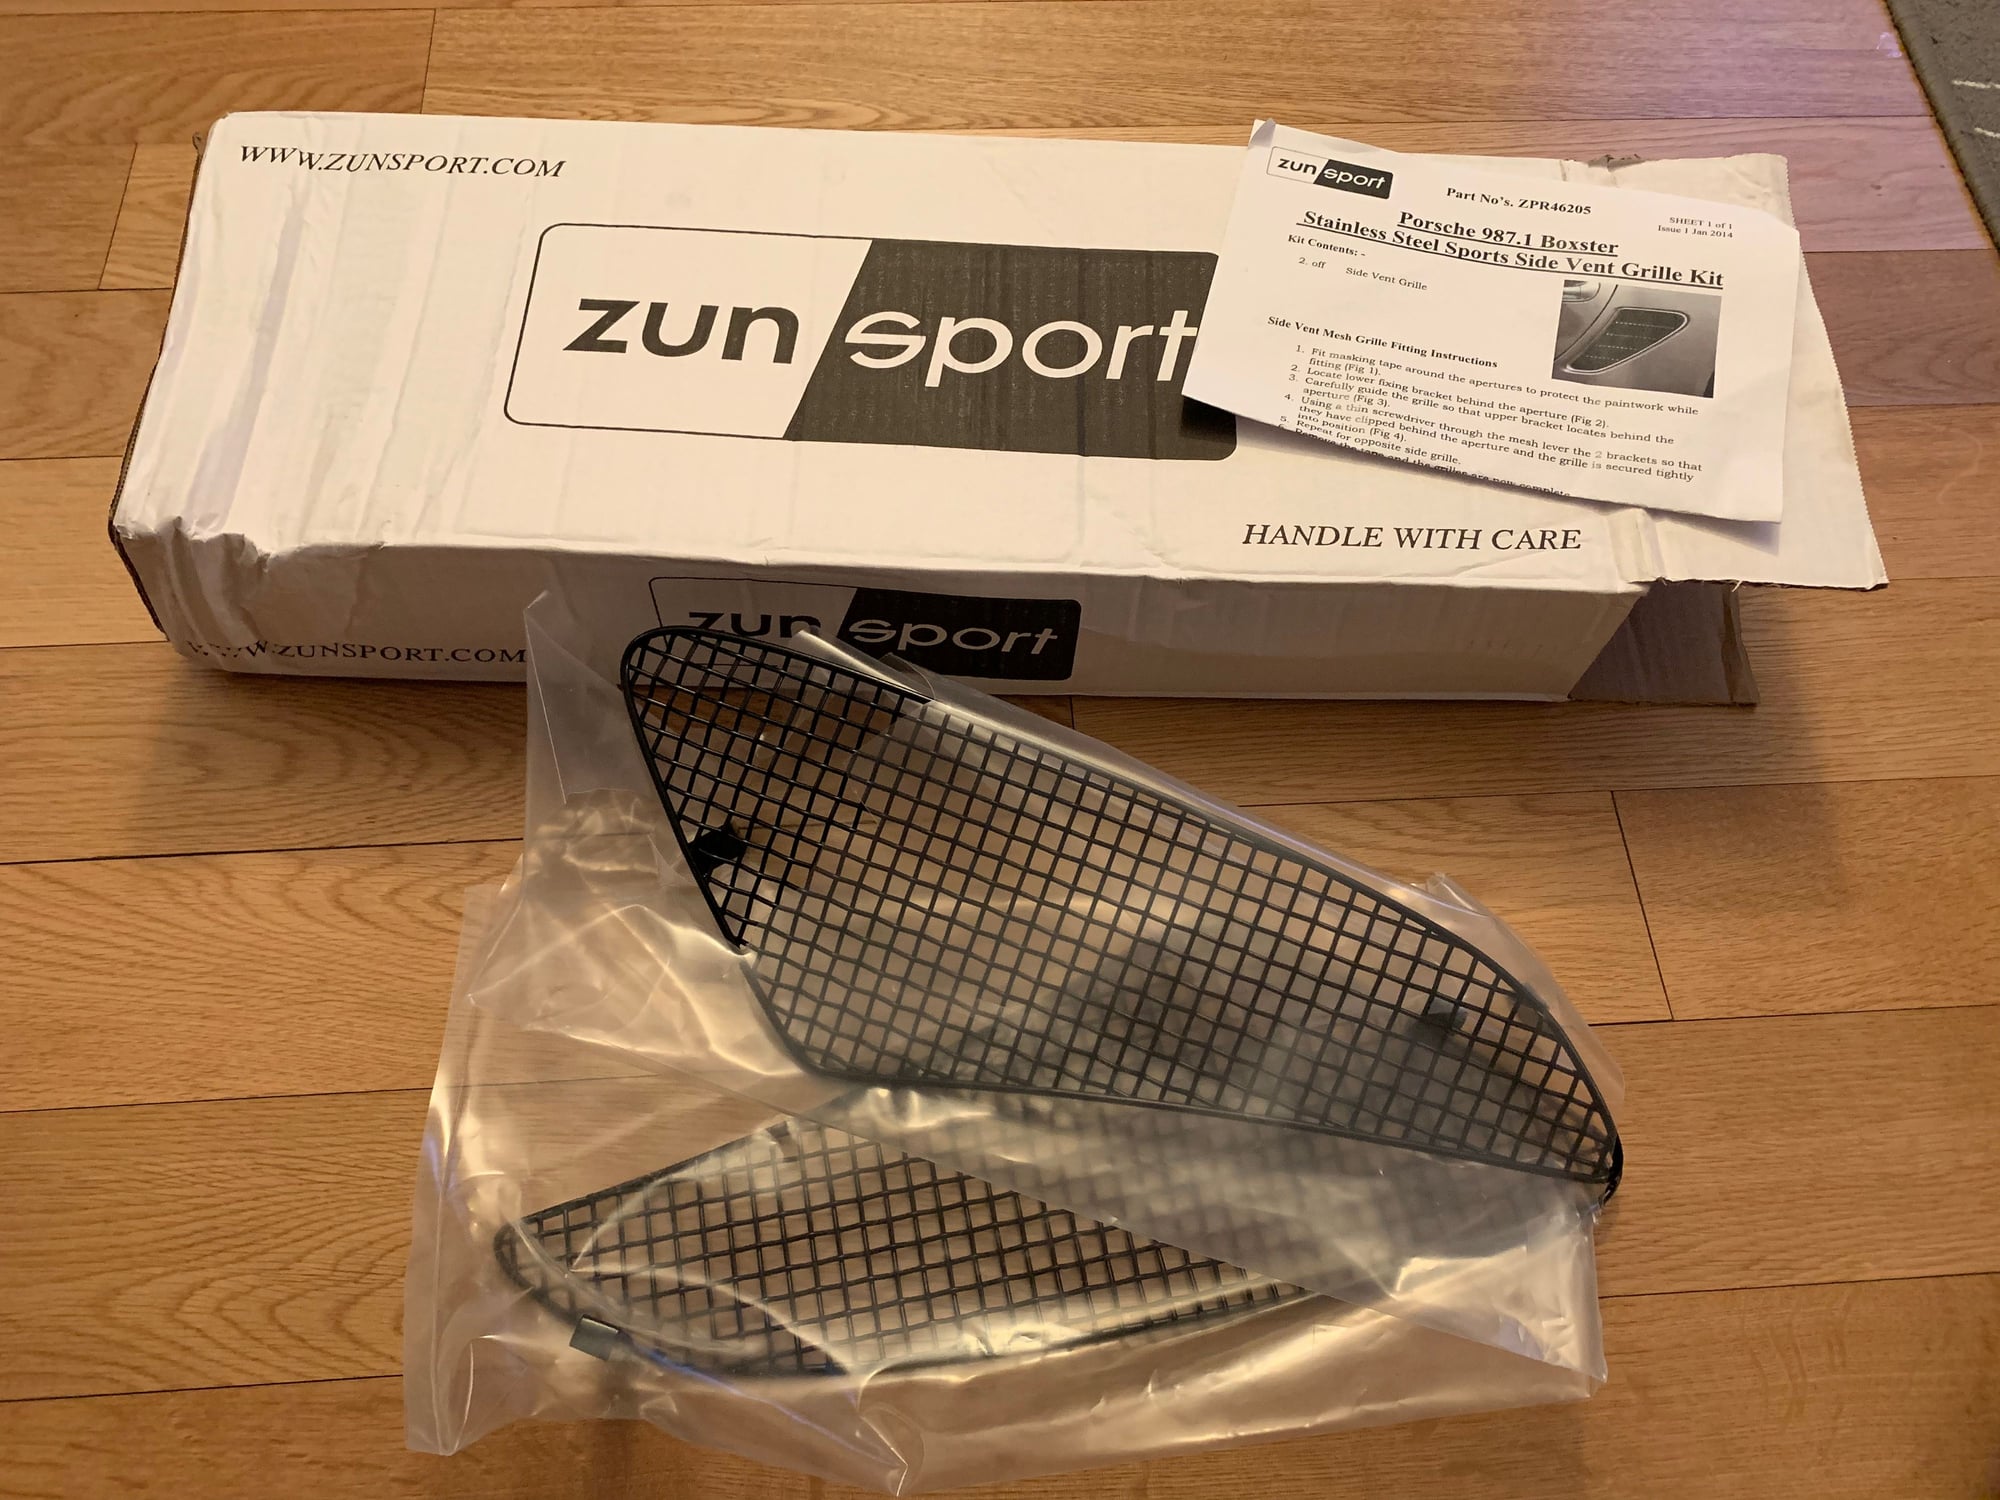 Exterior Body Parts - Zunsport 987.1 Boxster Side Vent Grille Set - New - 2005 to 2008 Porsche Boxster - New York, NY 10017, United States